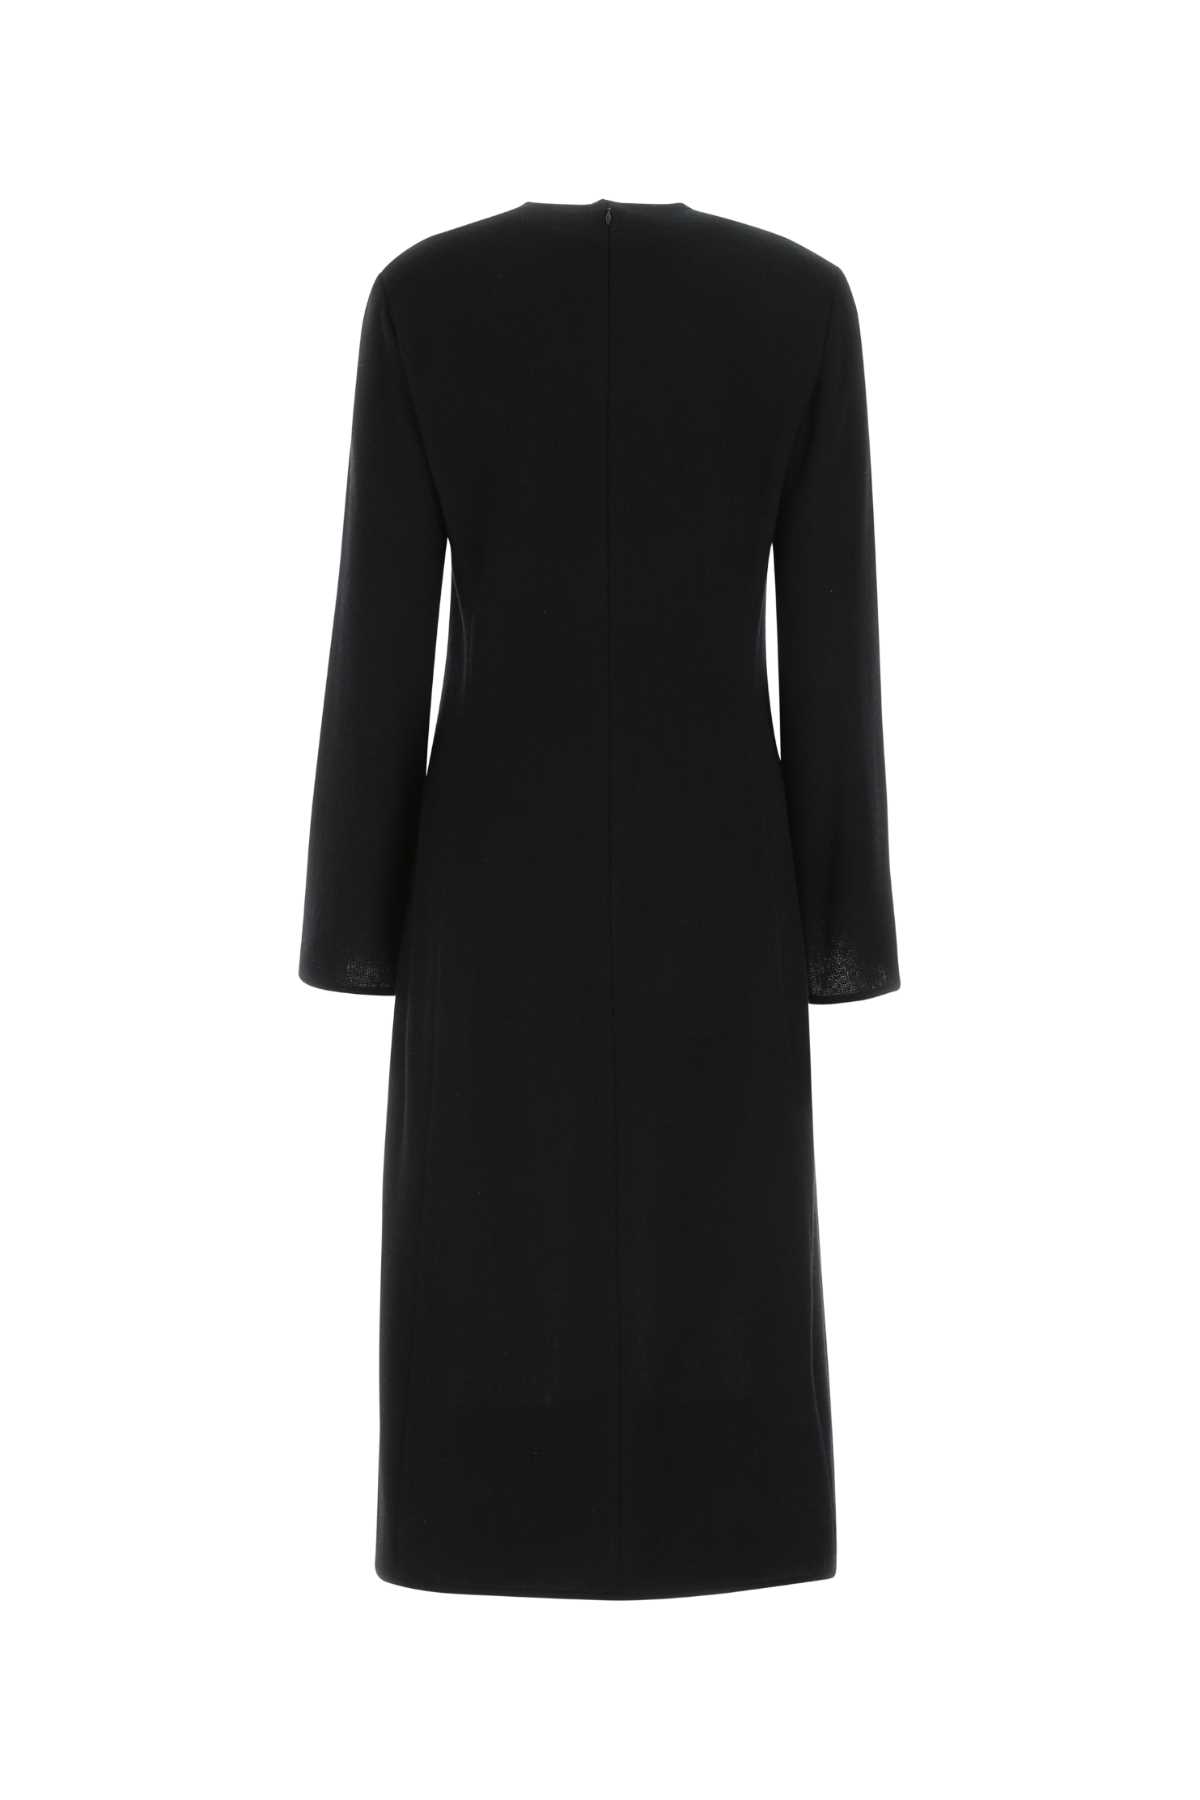 Chloé Black Wool And Cashmere Dress In 001